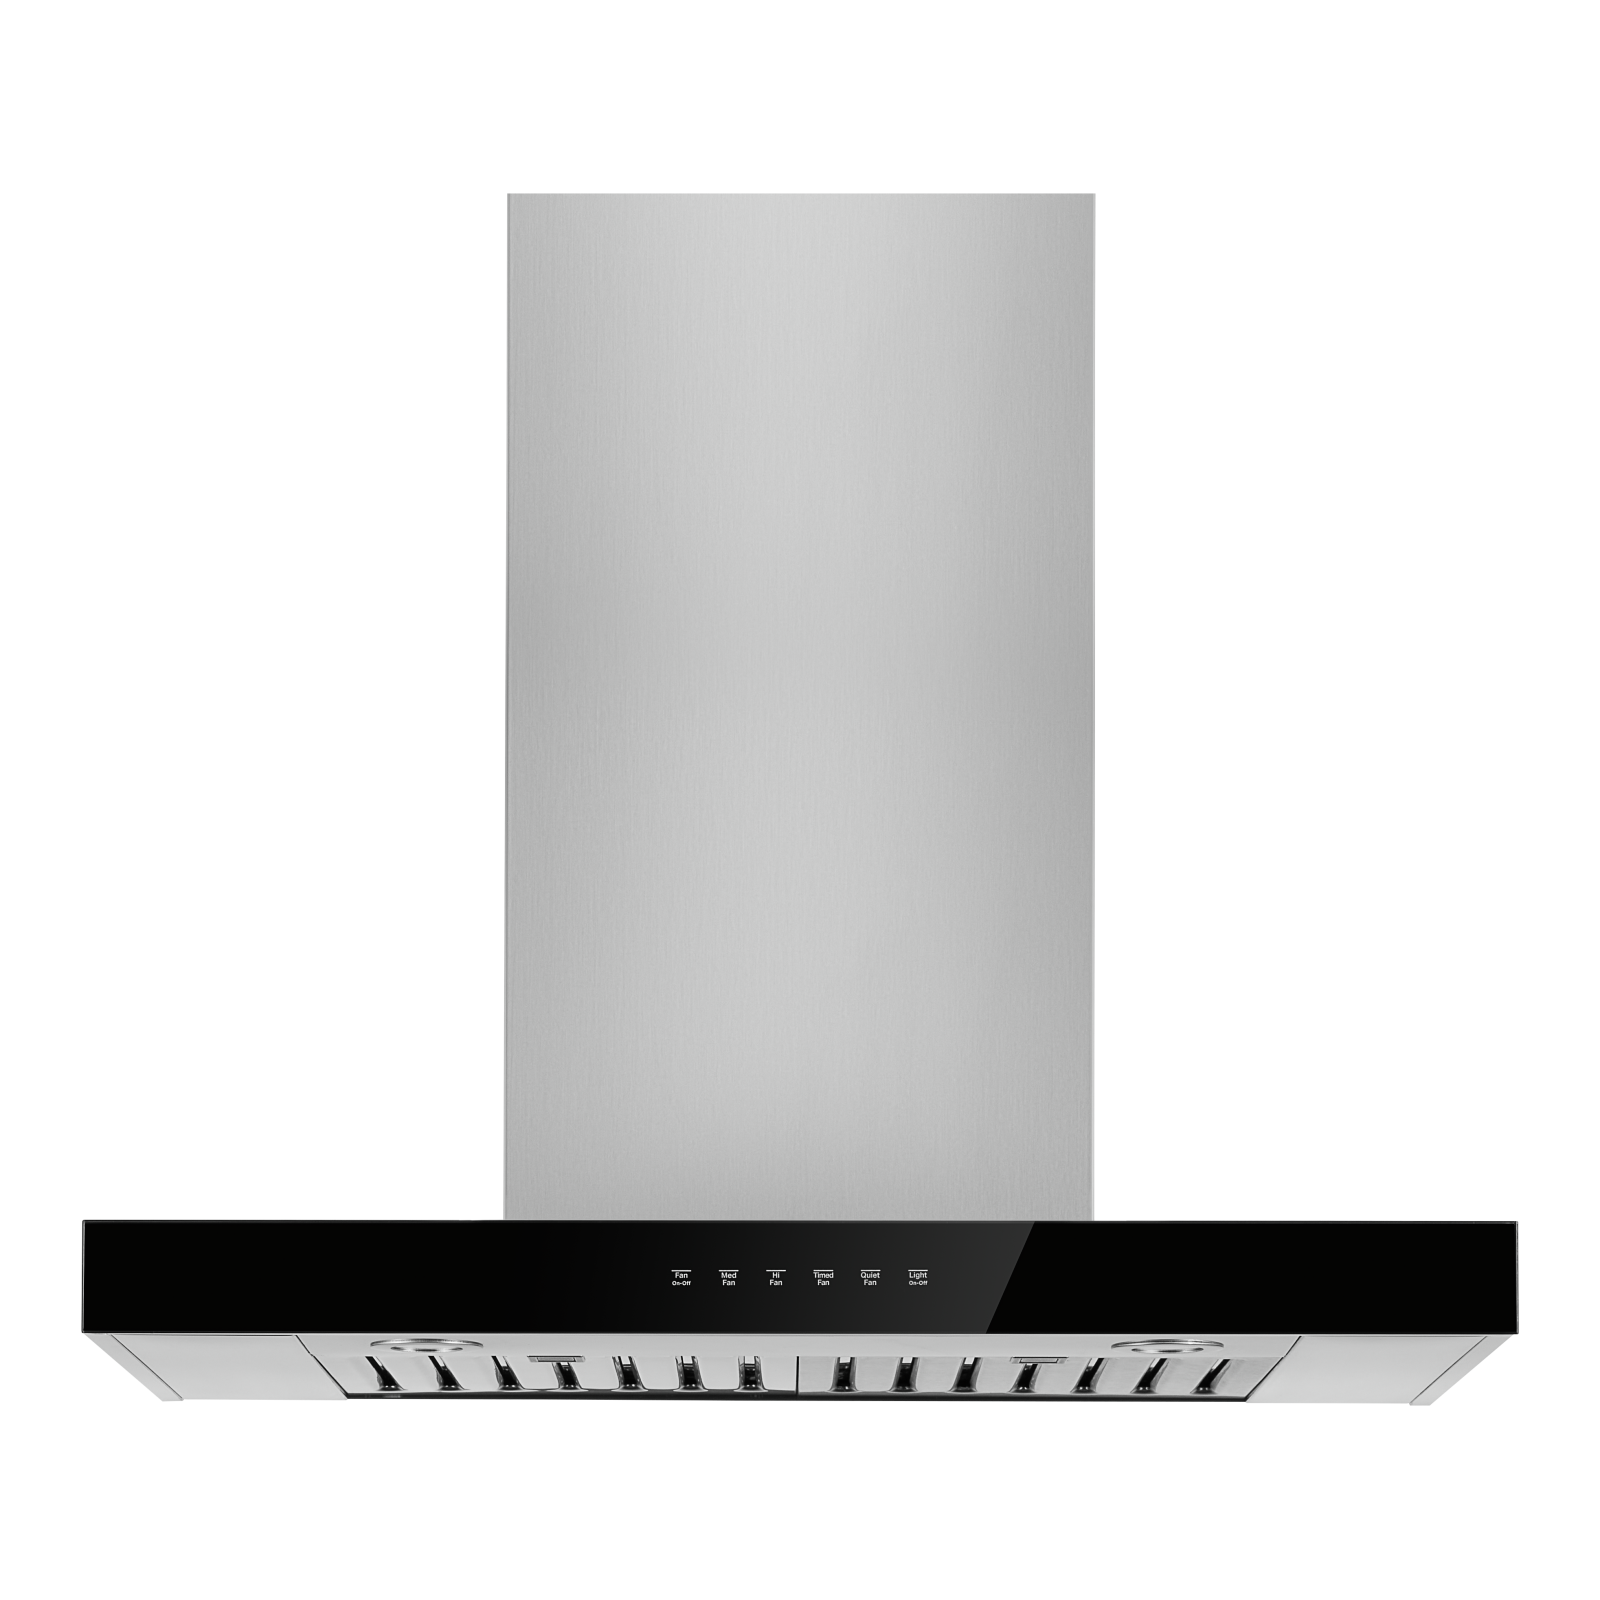 JennAir - 29.9375 Inch 550 CFM Wall Mount and Chimney Range Vent in Stainless - JVR0430HS